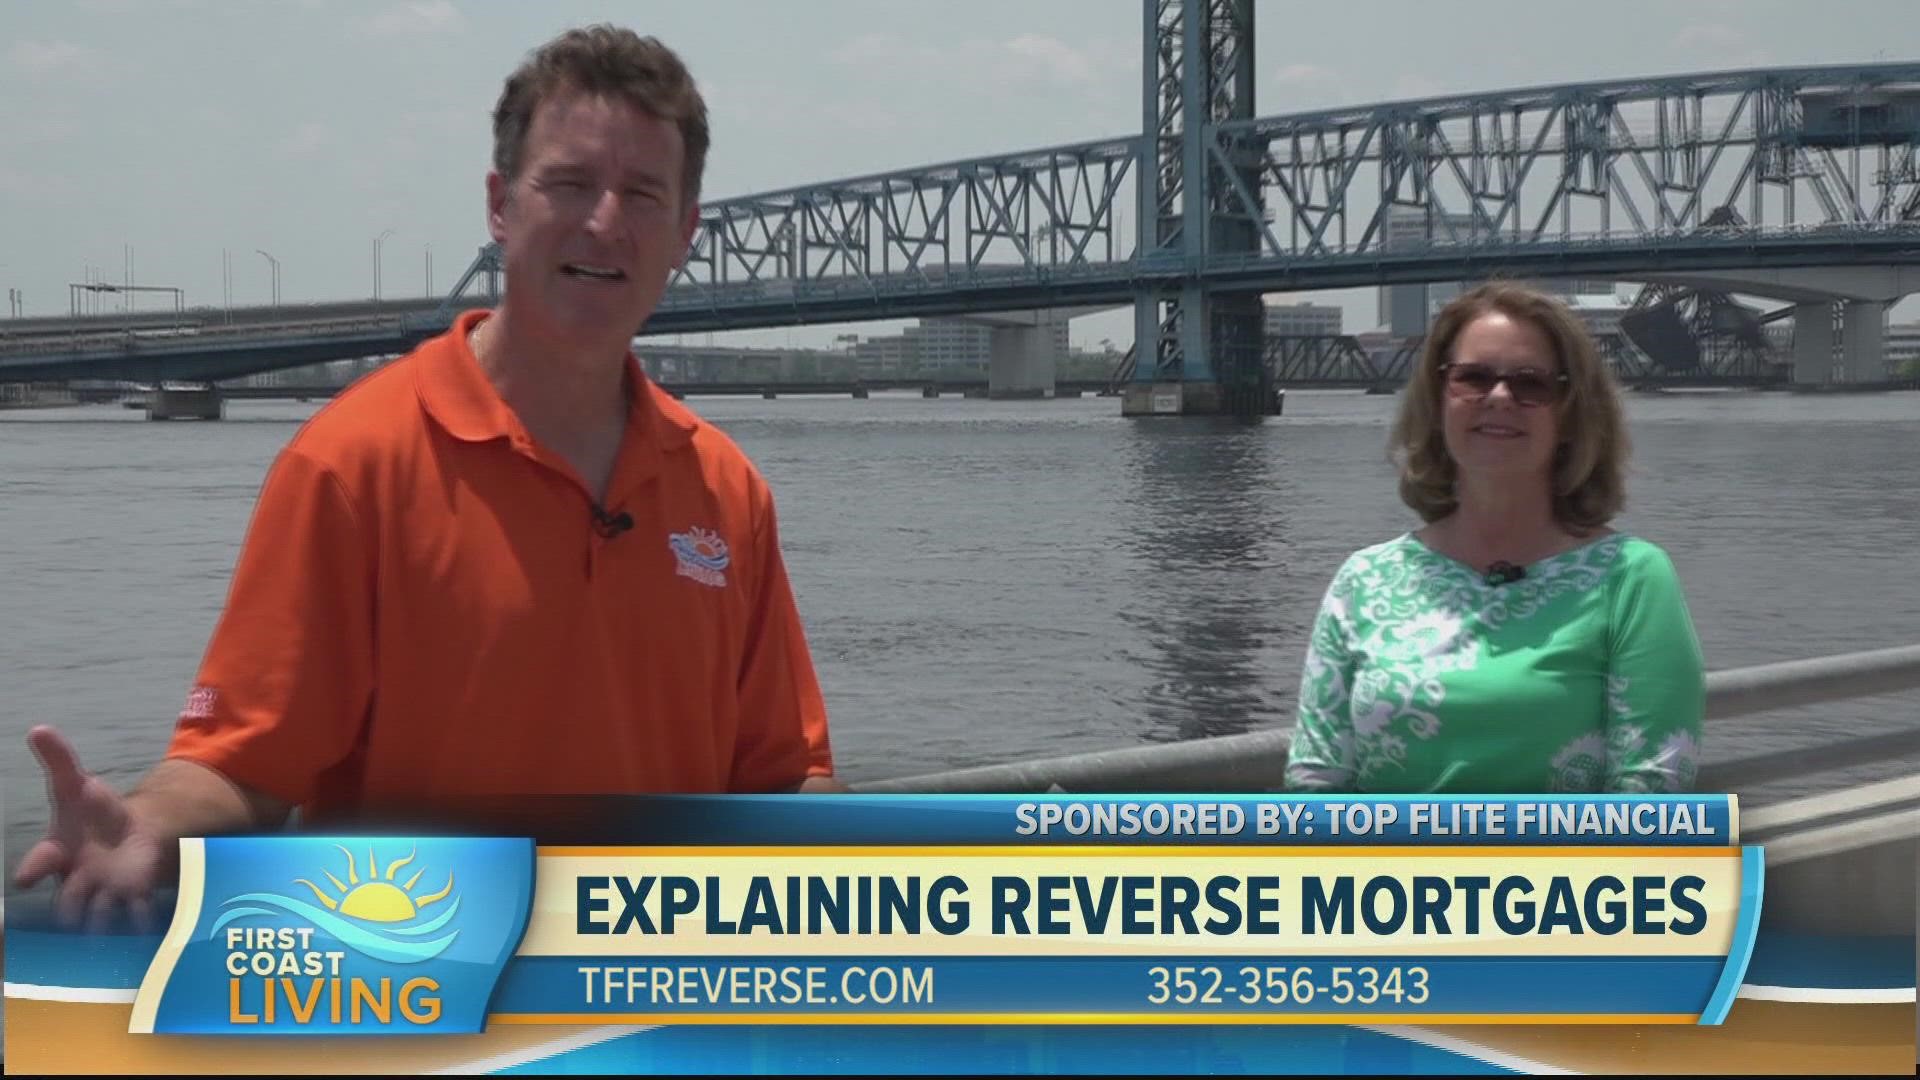 Kathy Muni, Reverse Mortgage Expert, Top Flite Financial, shares why she loves helping seniors manage their biggest asset. Their motto is: We Educate; You Decide.